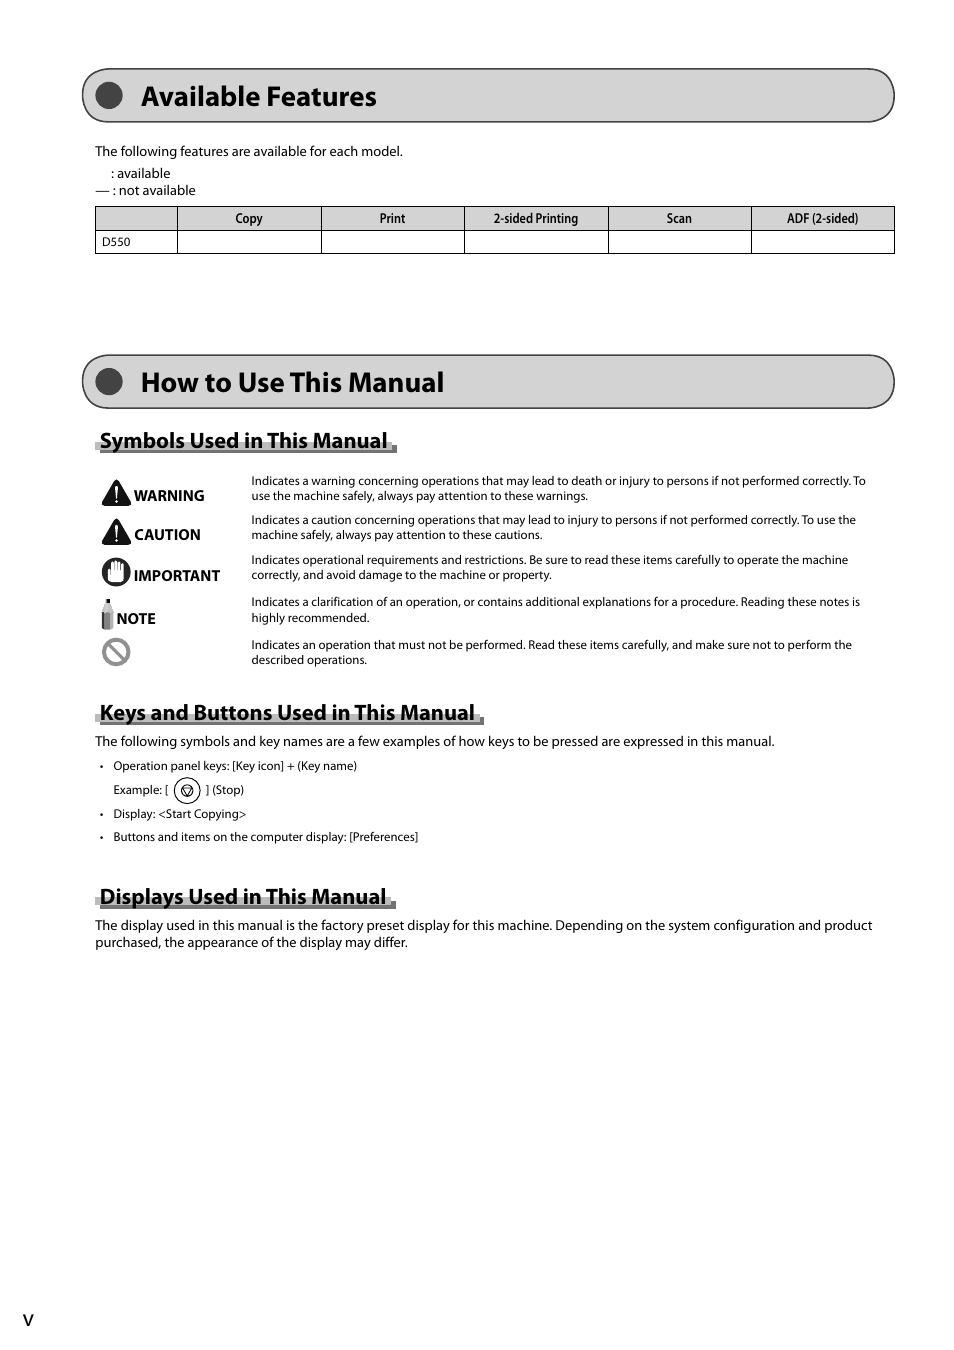 Available features, How to use this manual, Symbols used in this manual | Keys and buttons used in this manual, Displays used in this manual | Canon imageCLASS D550 User Manual | Page 8 / 116